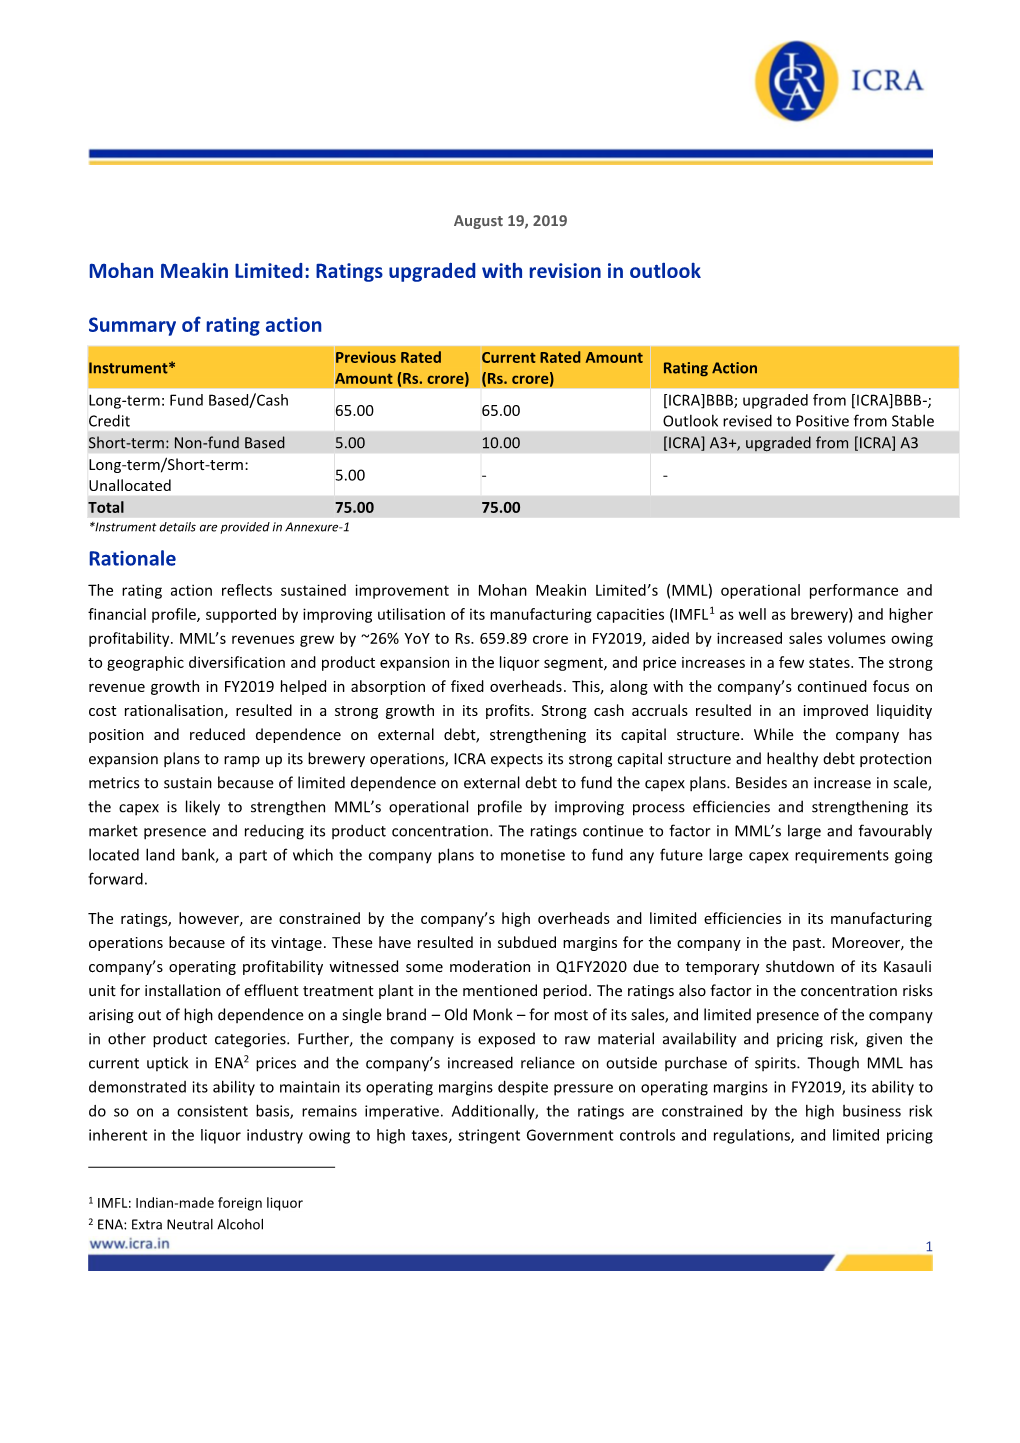 Mohan Meakin Limited: Ratings Upgraded with Revision in Outlook